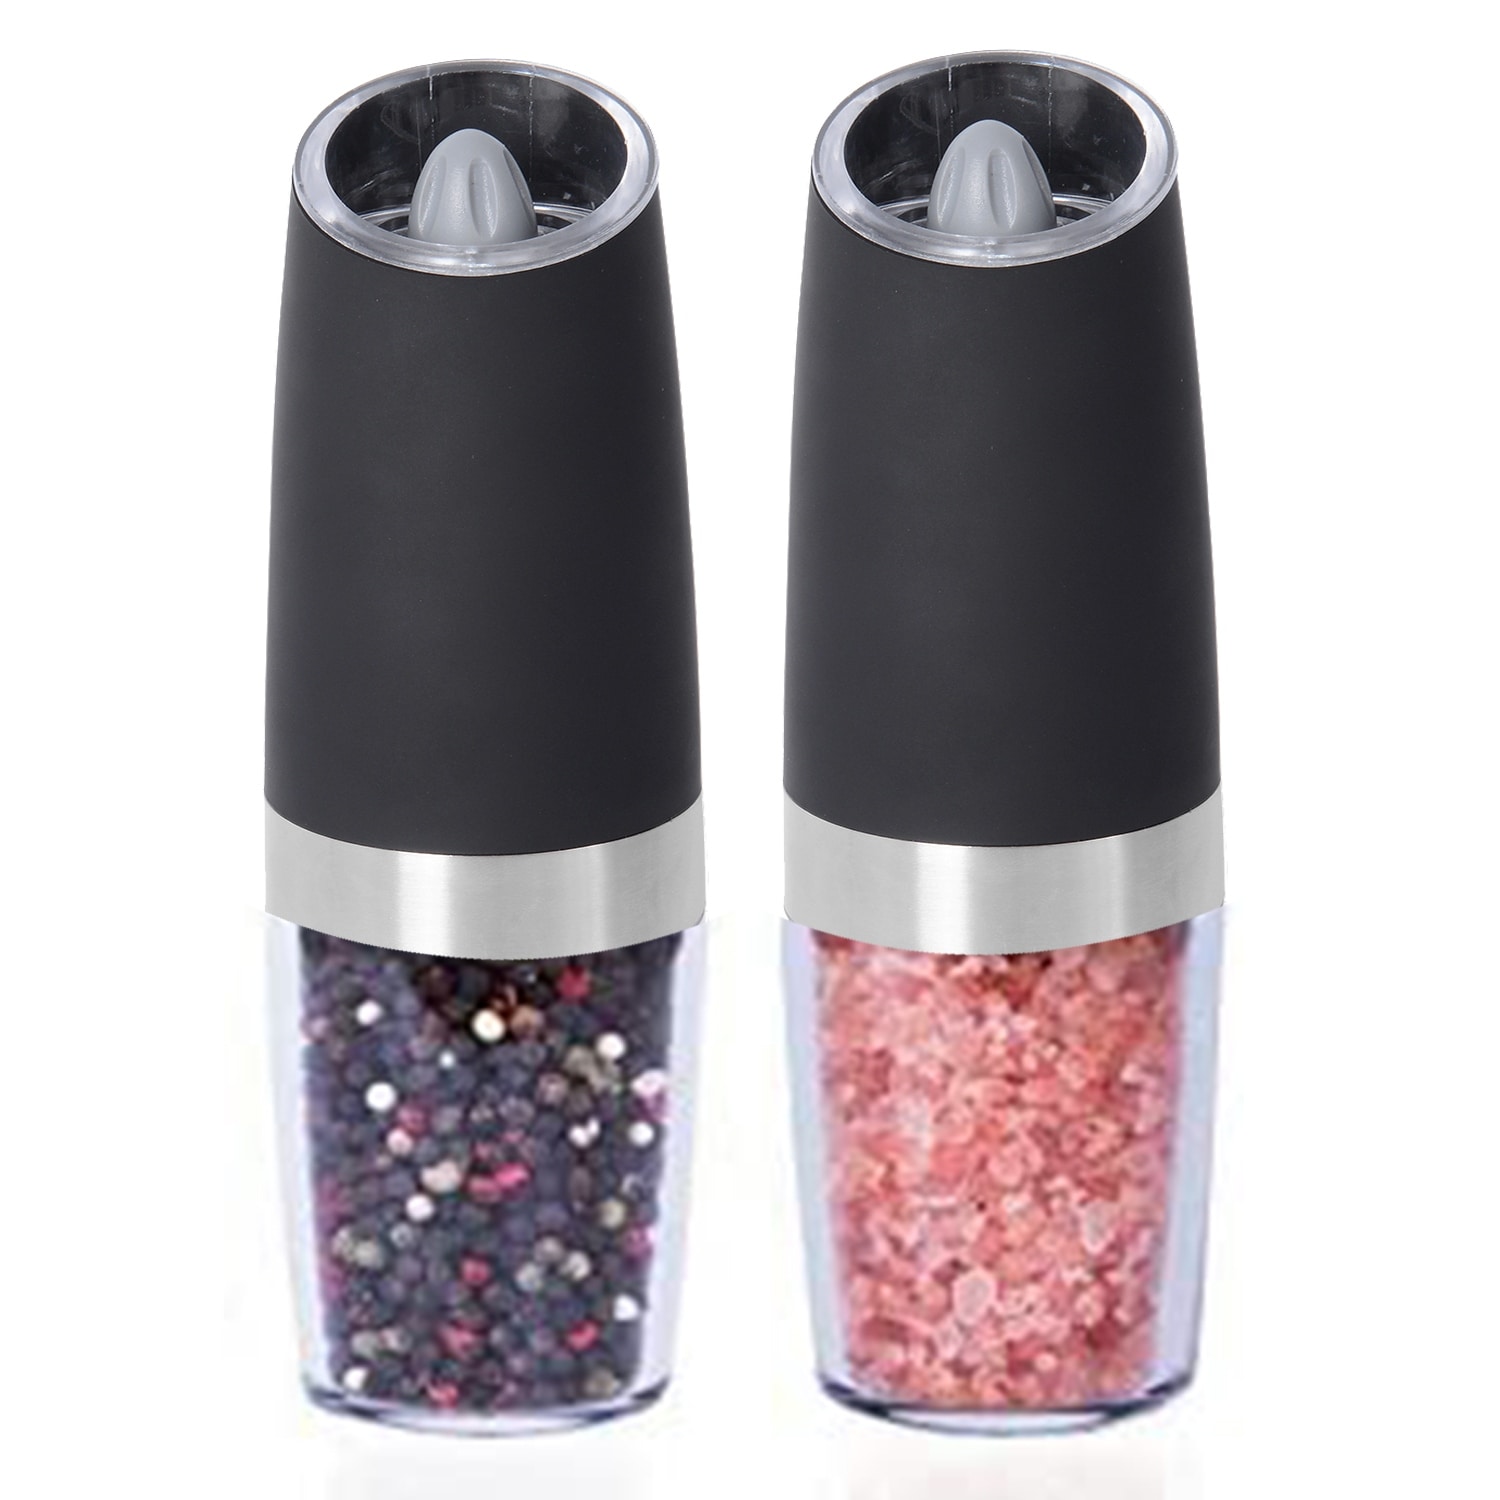 Department Store 1pc Rechargeable Gravity Electric Salt And Pepper